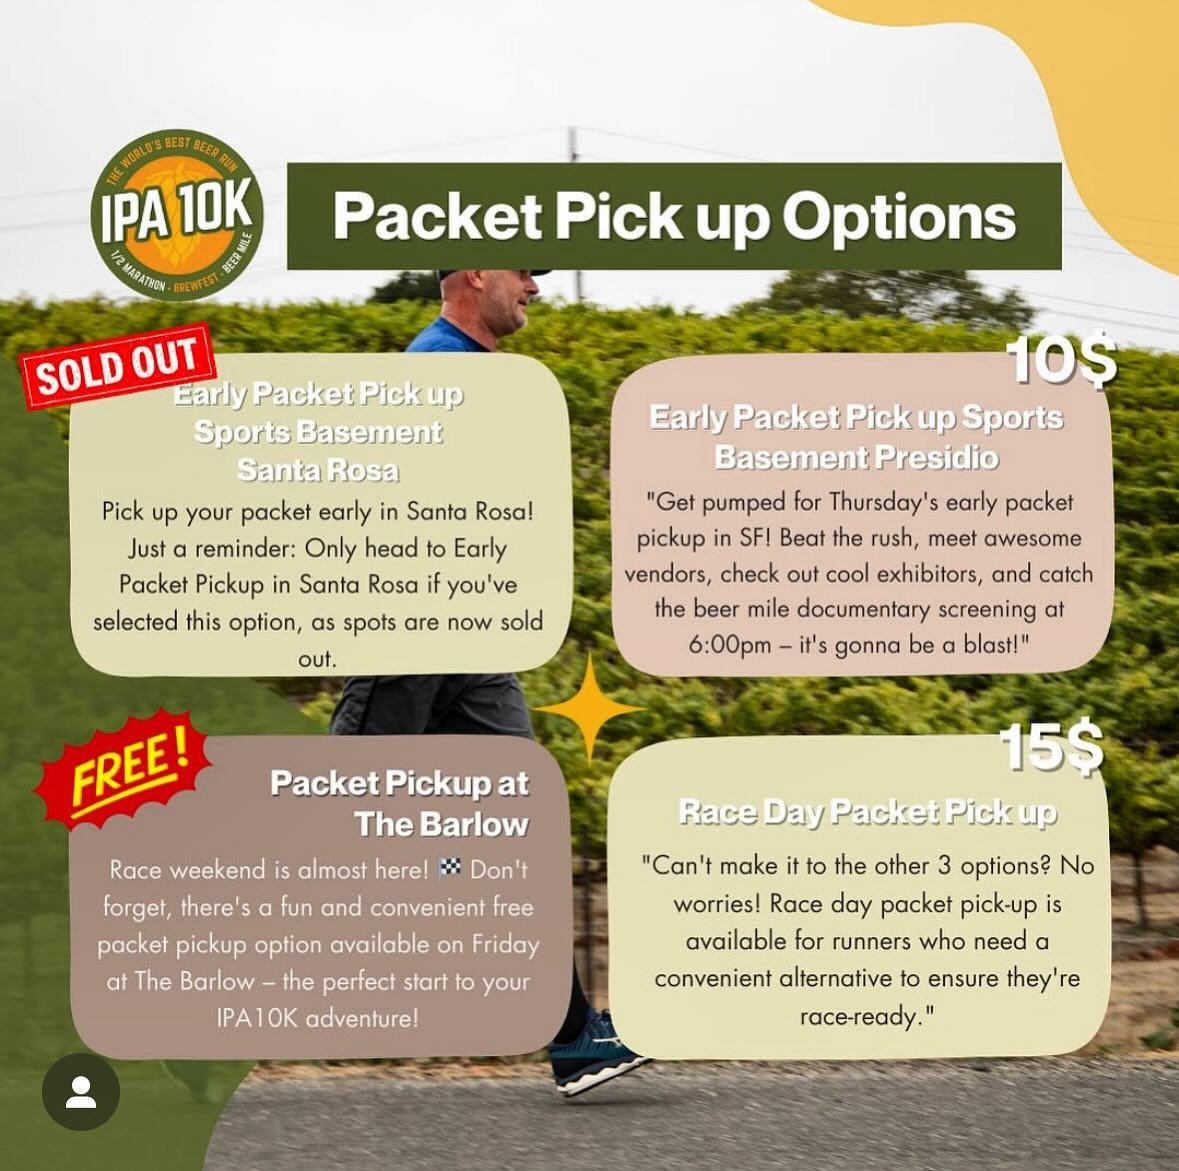 &ldquo;🏁 Haven&rsquo;t chosen your packet pickup option yet? Head over to the IPA10k Race Roster store to select your preferred option now! Don&rsquo;t miss out on the convenience of early pickup or the excitement of race day pickup. Secure your cho